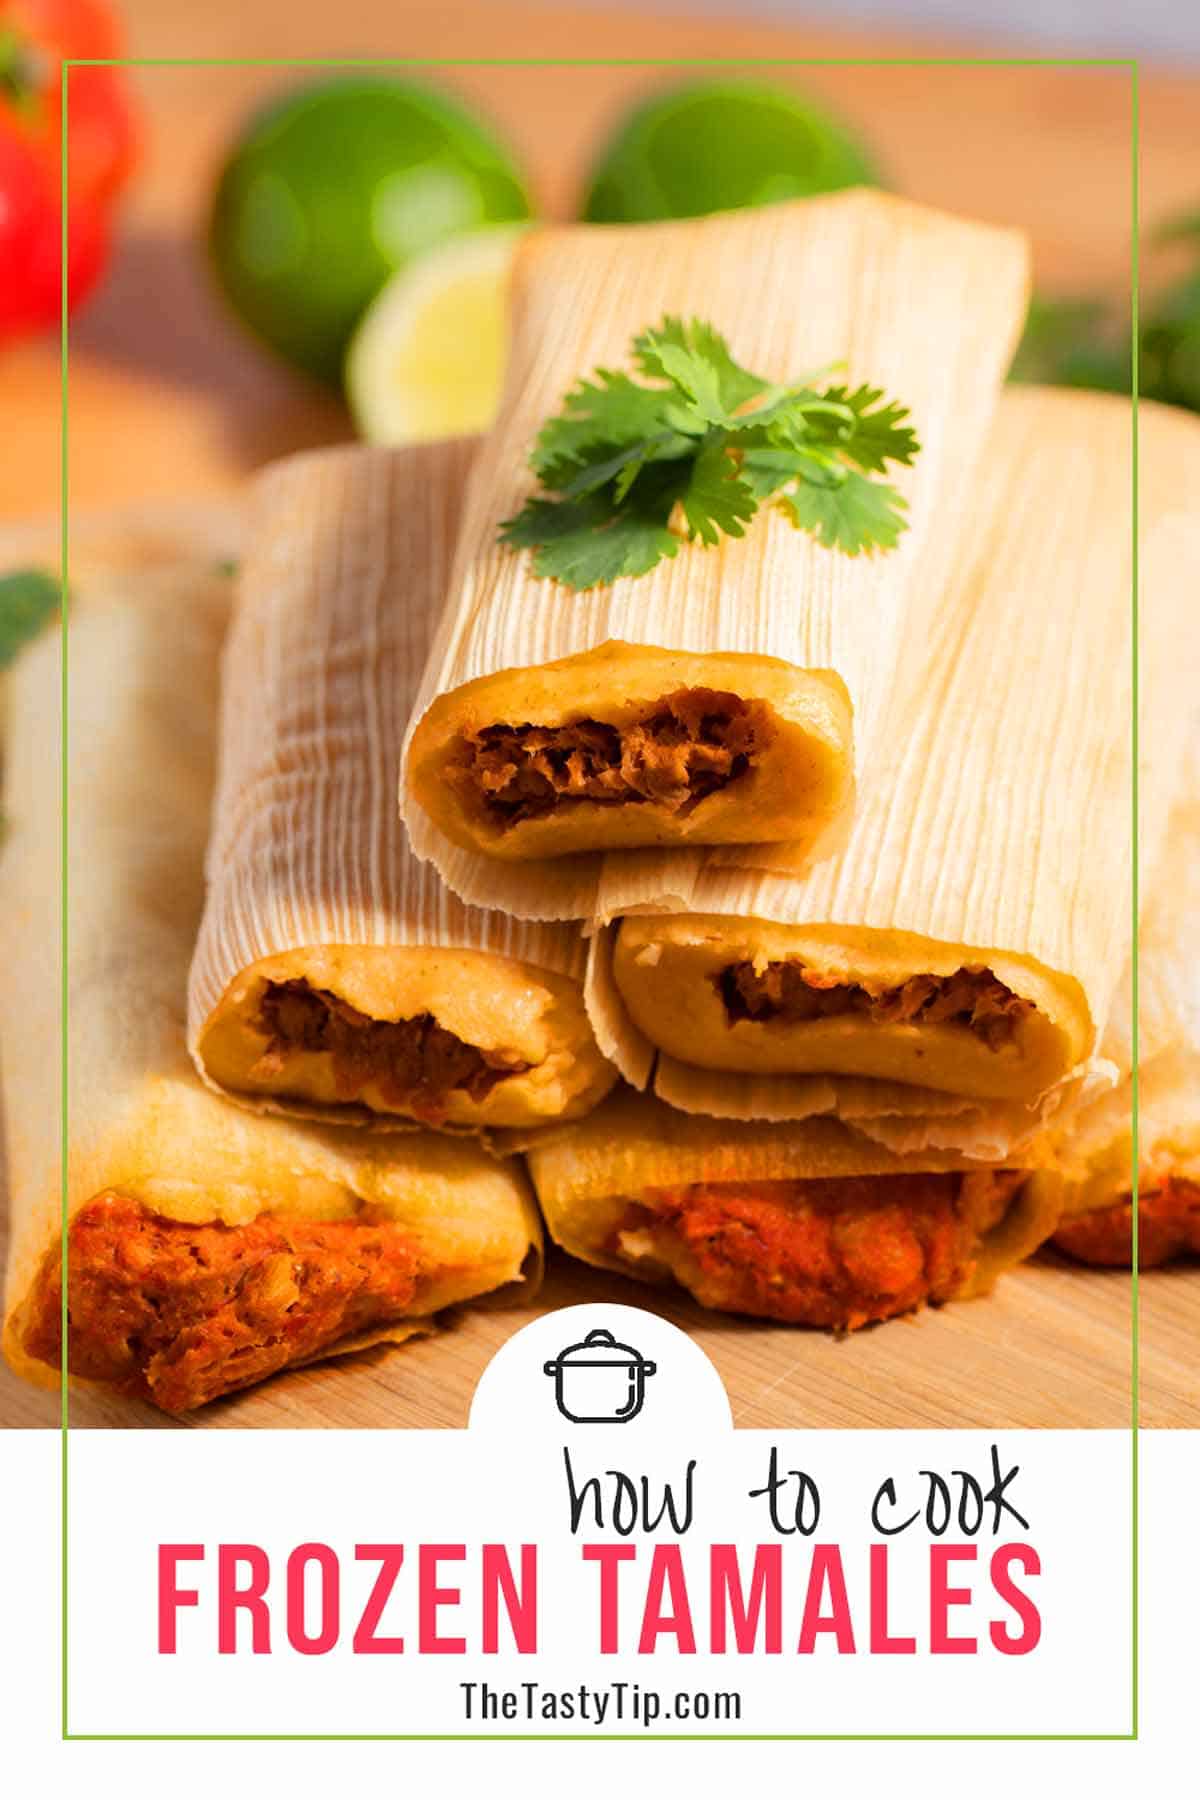 Stack of cooked tamales.